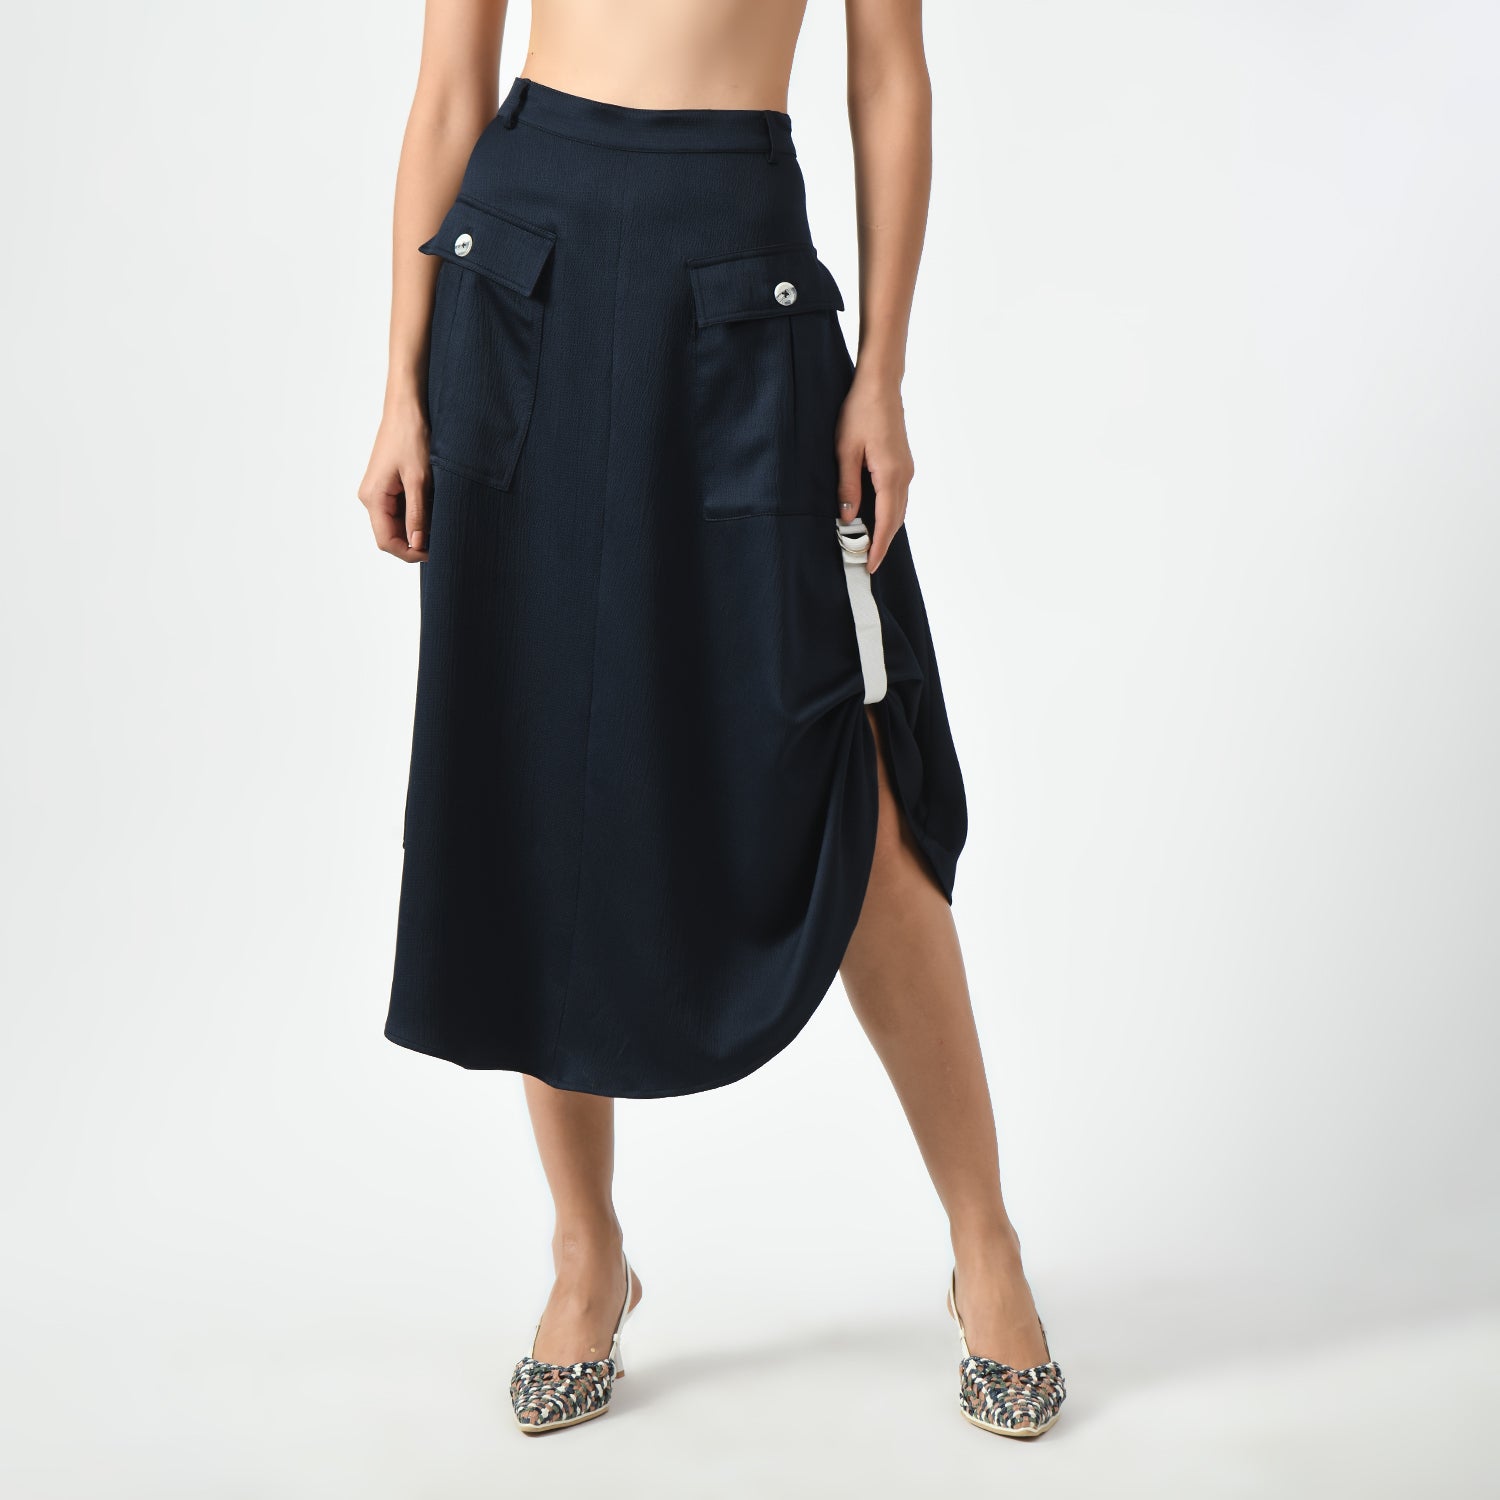 Navy Blue Skirt With Pocket